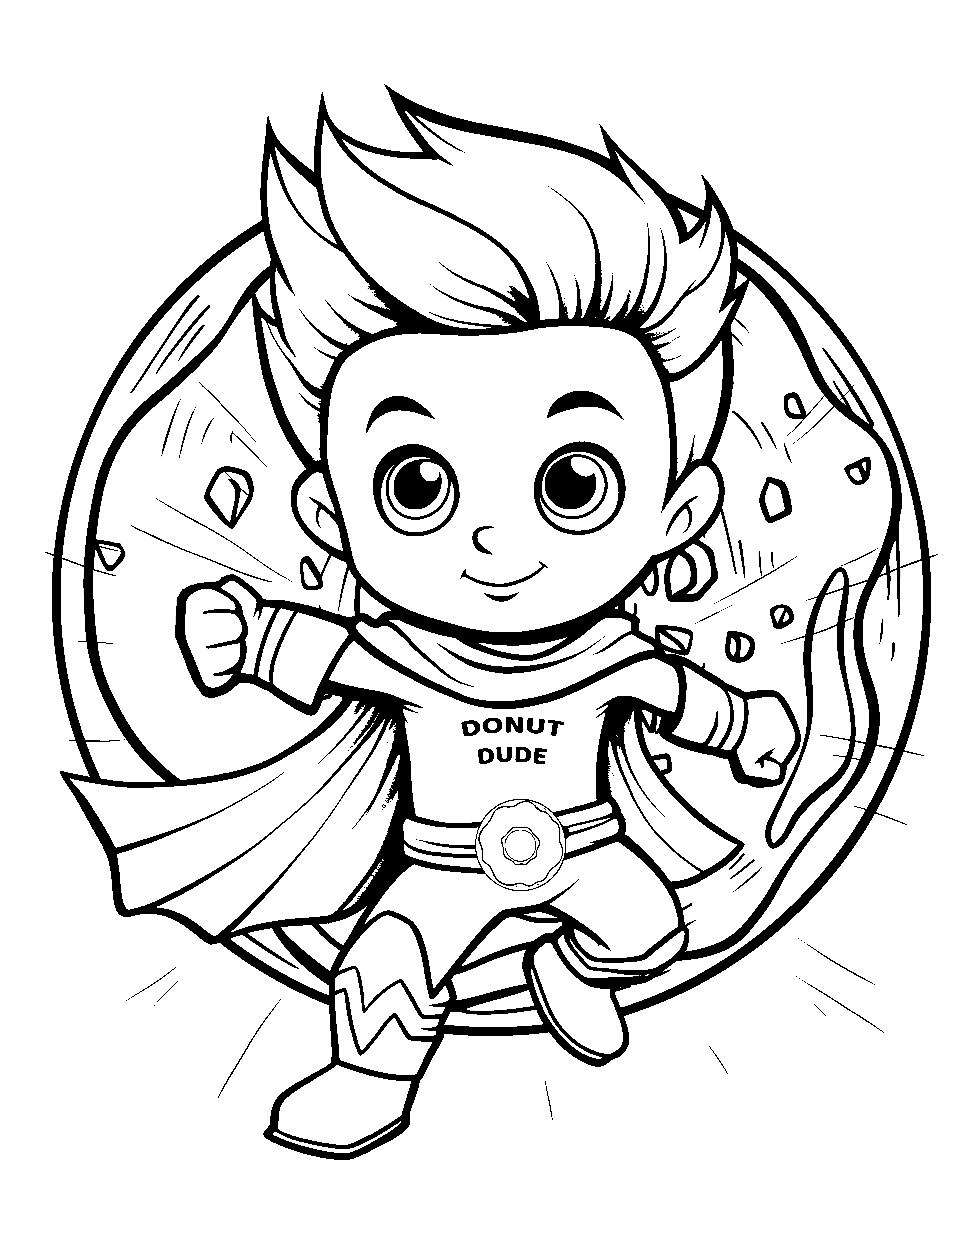 Superhero Donut Power Coloring Page - A superhero with a donut as a power-up.